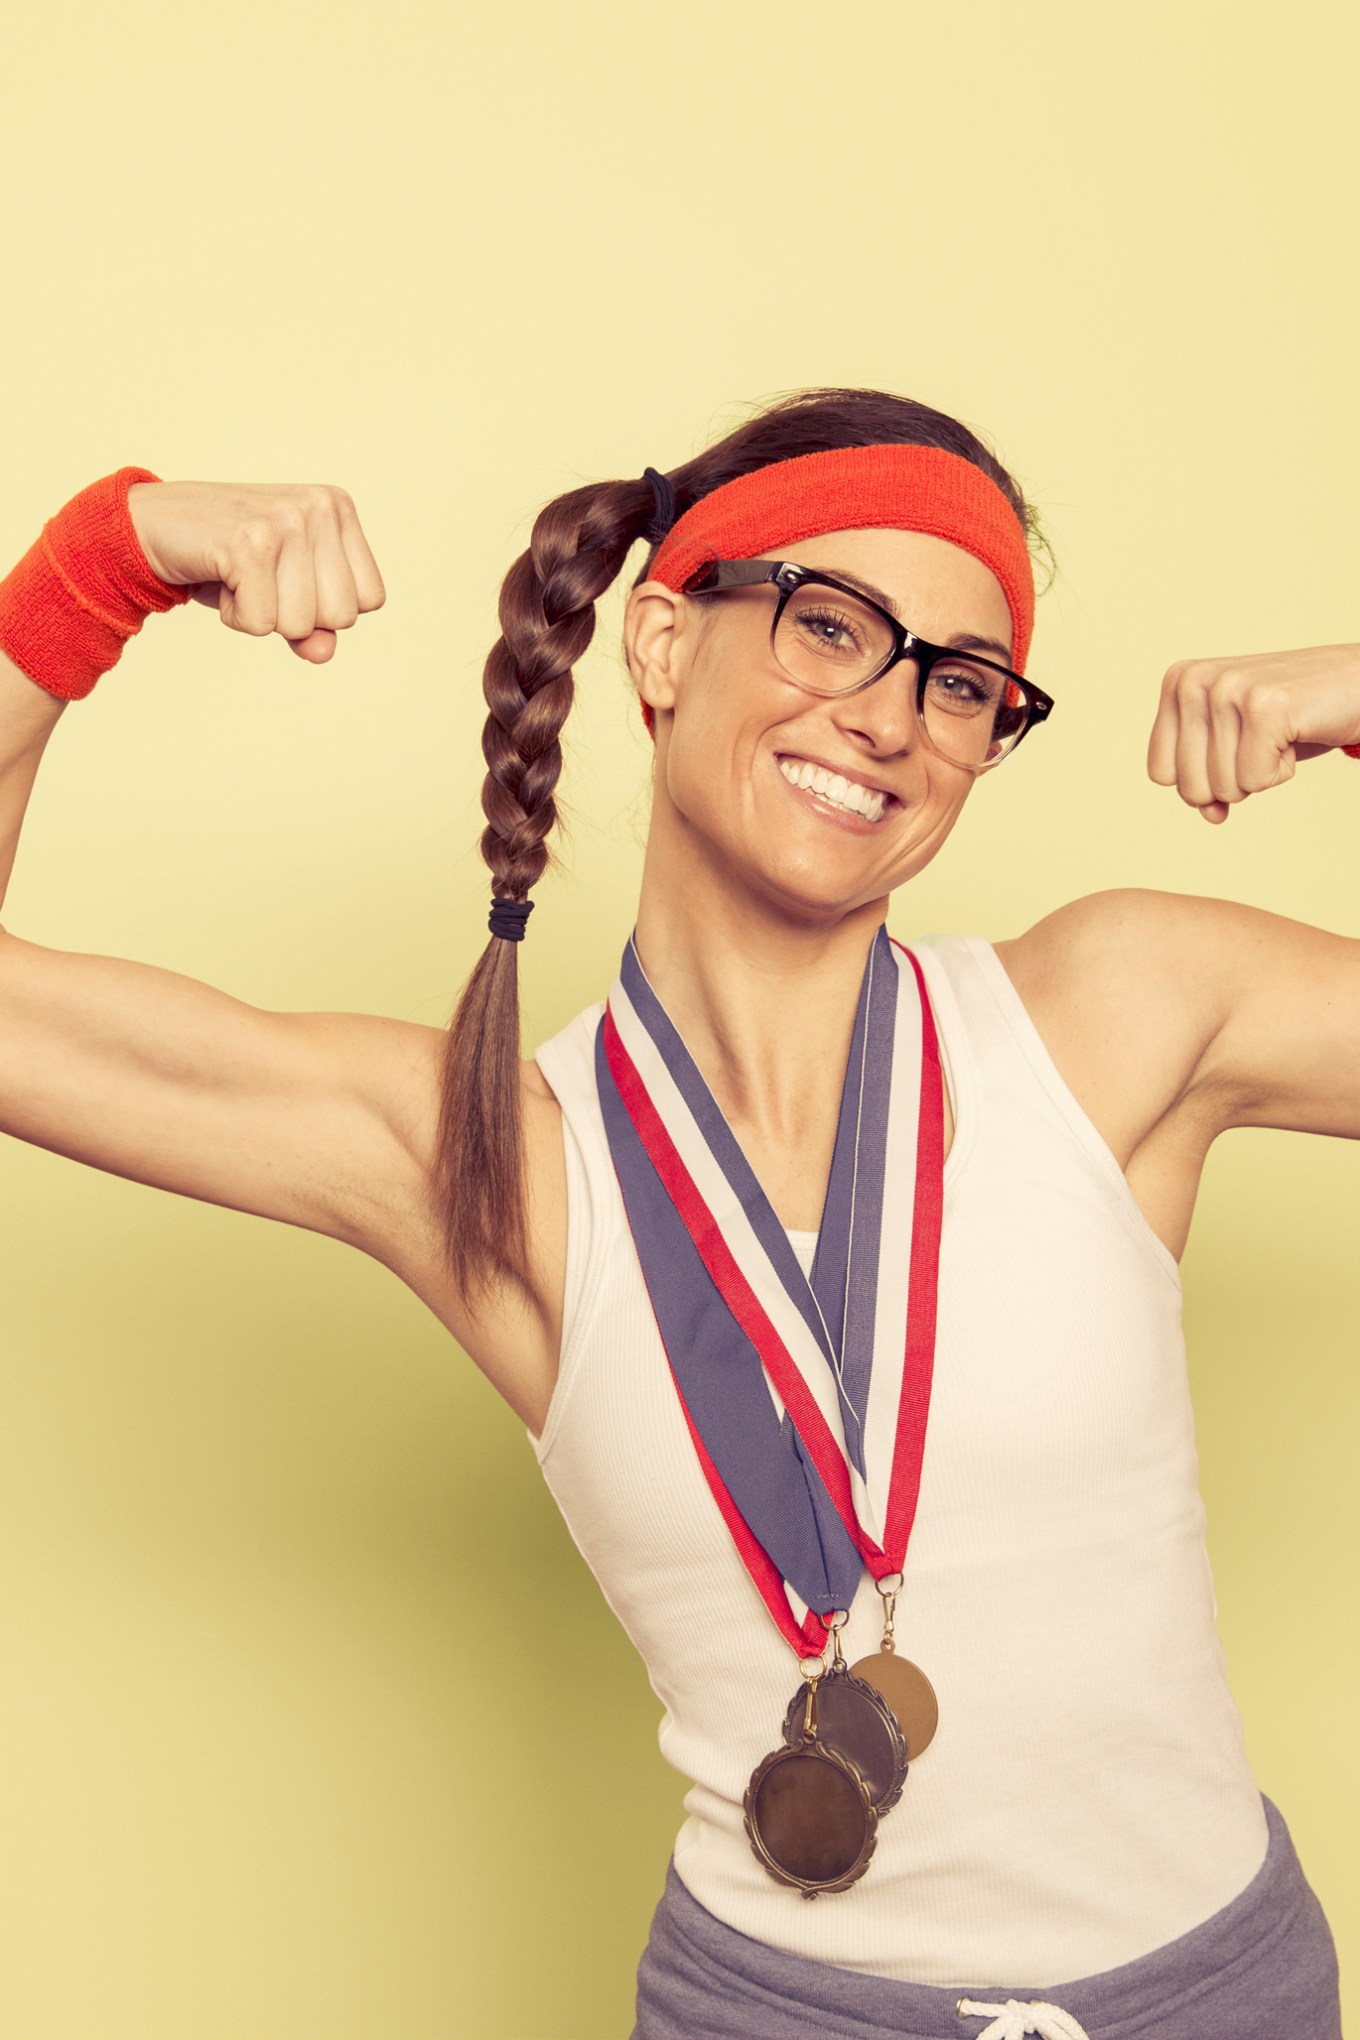 Woman with glassesin workout gear with medals flexing biceps